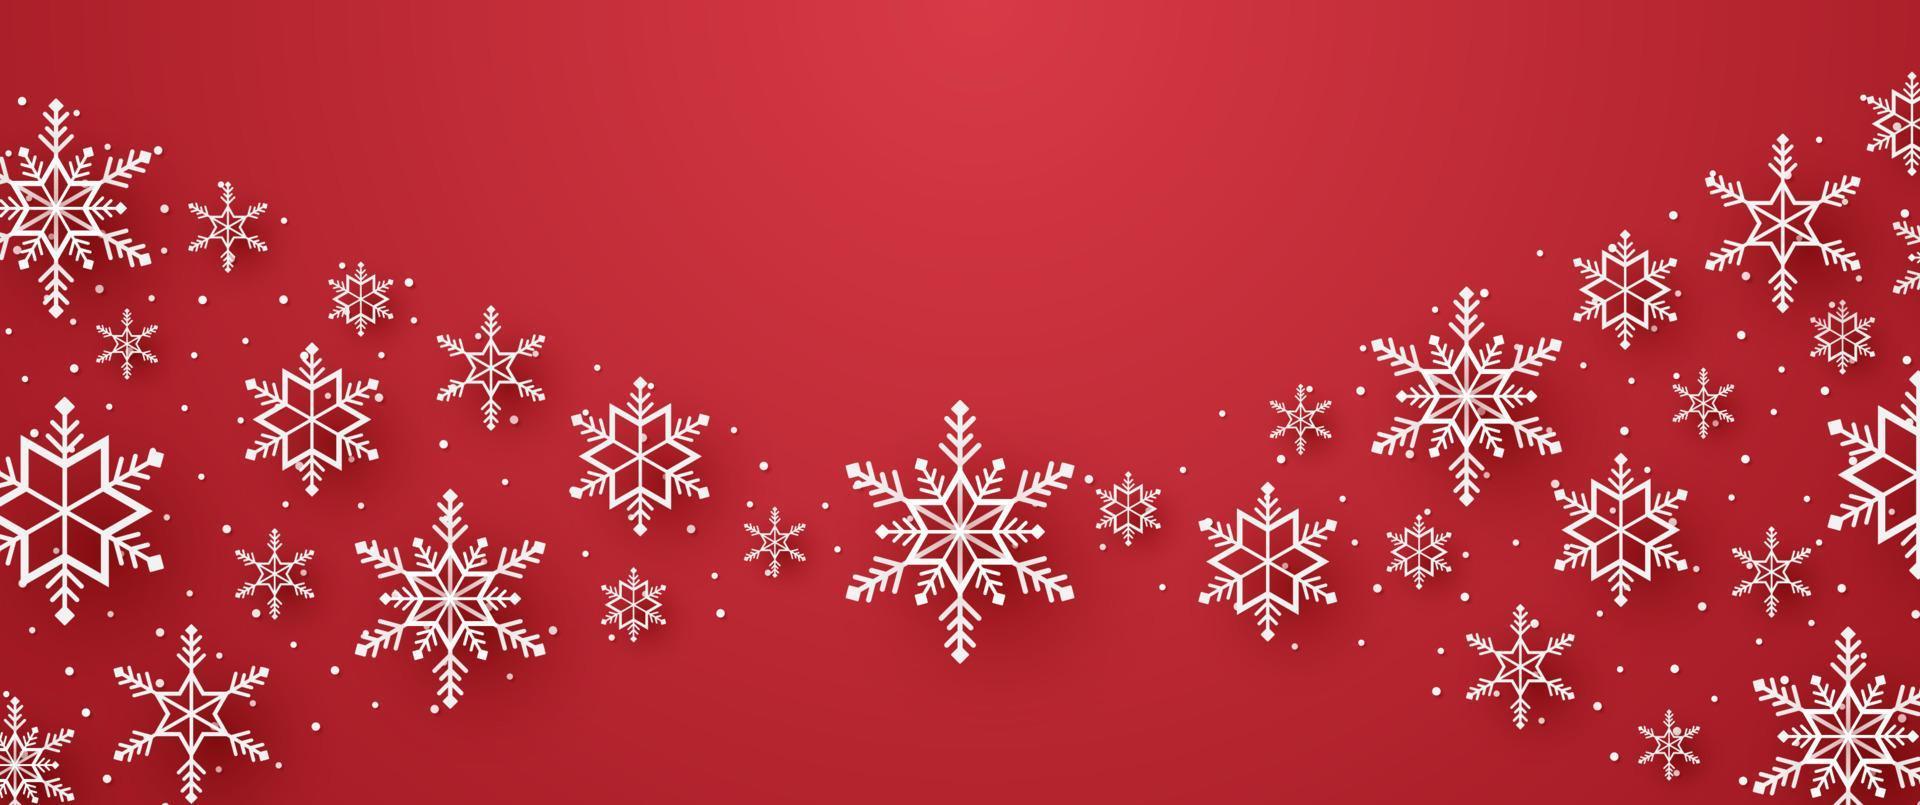 Merry Christmas, snowflakes and snow with blank space in paper art style vector